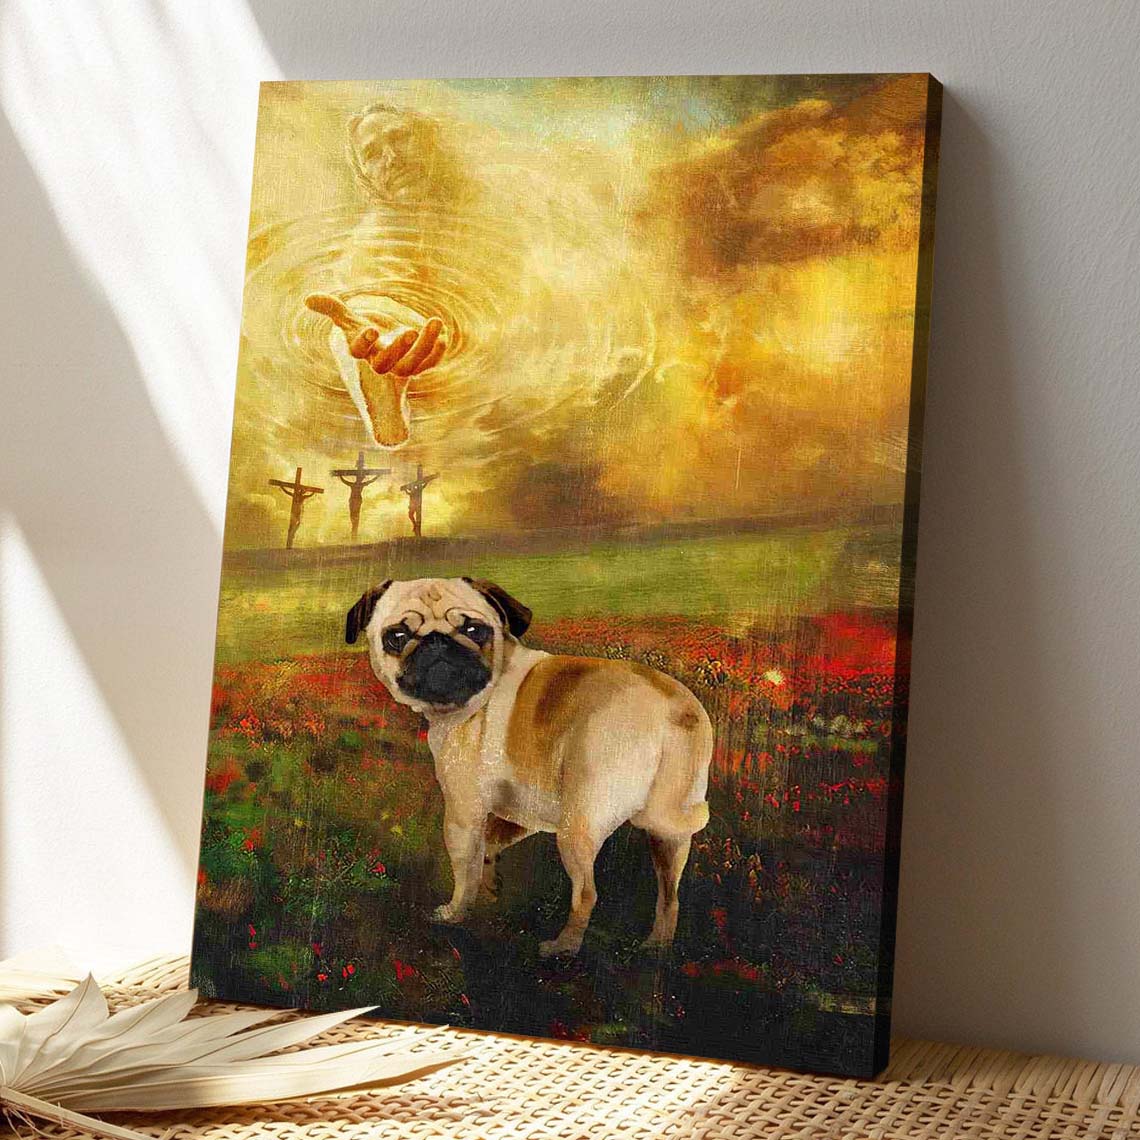 Christian Canvas Wall Art - God Canvas - Jesus And Pug - To The Beautiful World Canvas - Bible Verse Canvas - Ciaocustom